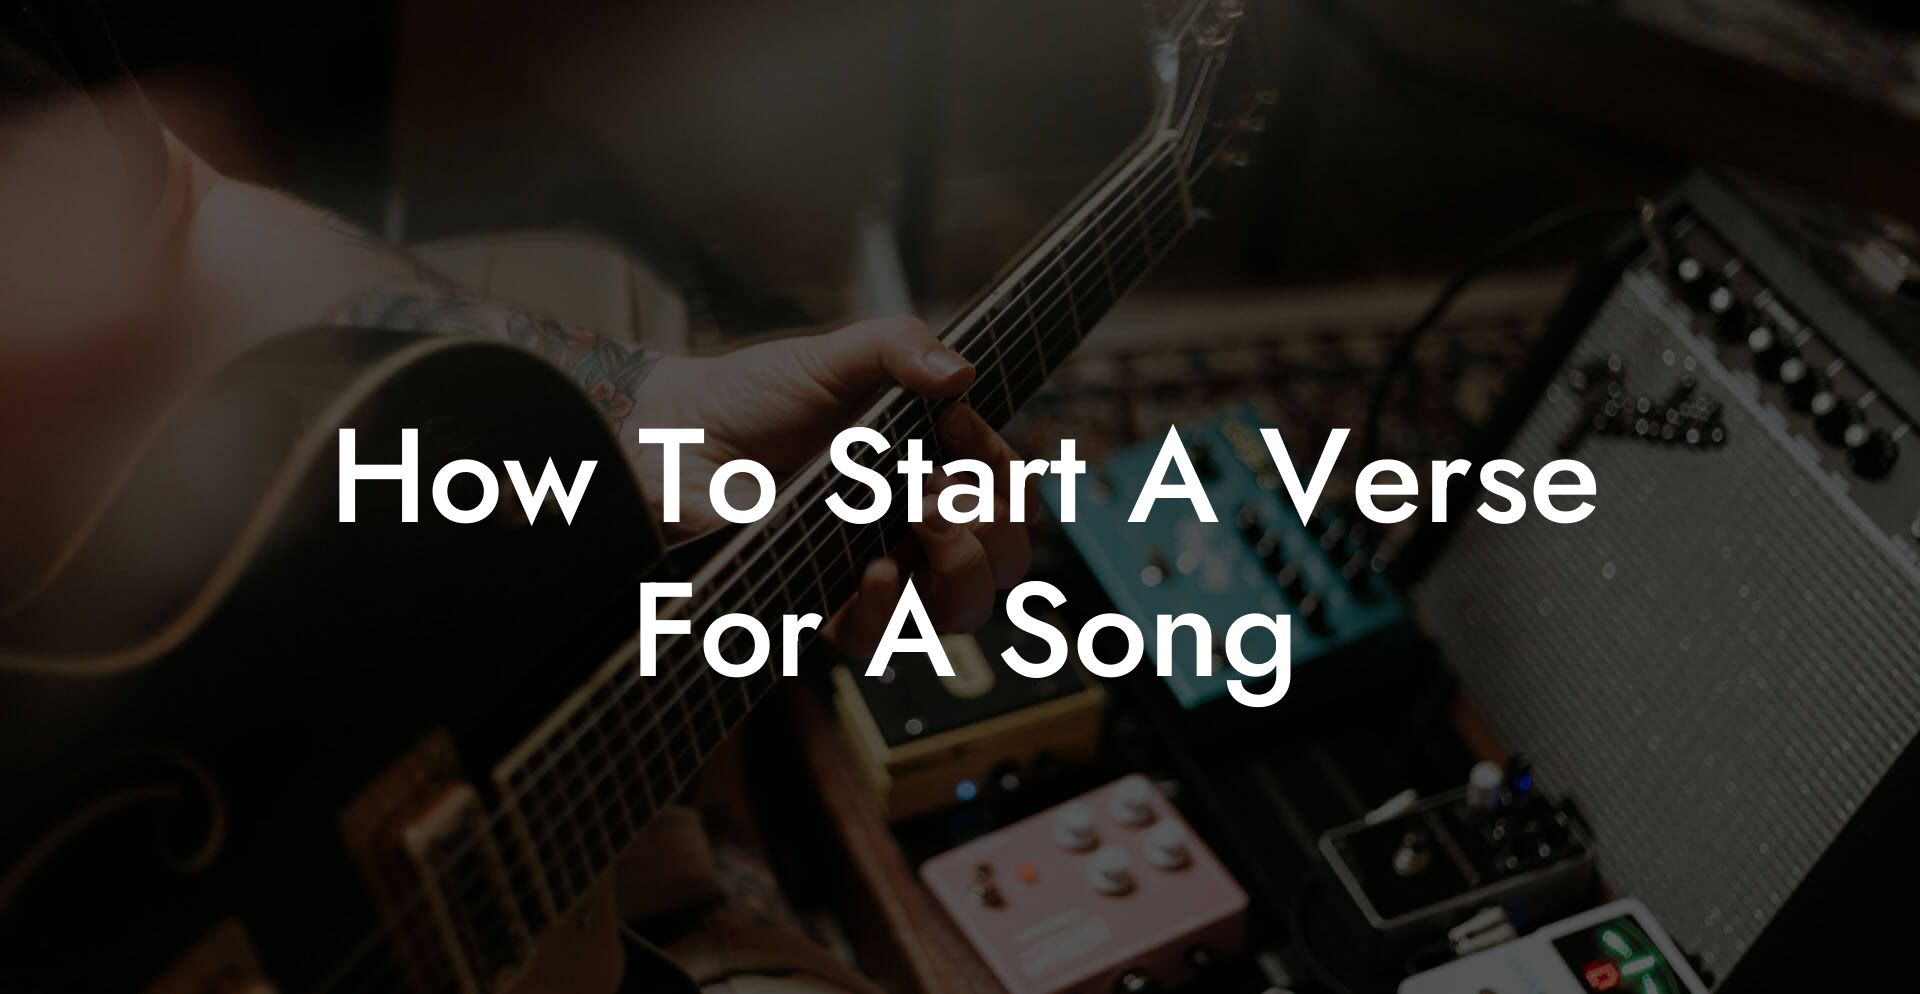 how to start a verse for a song lyric assistant